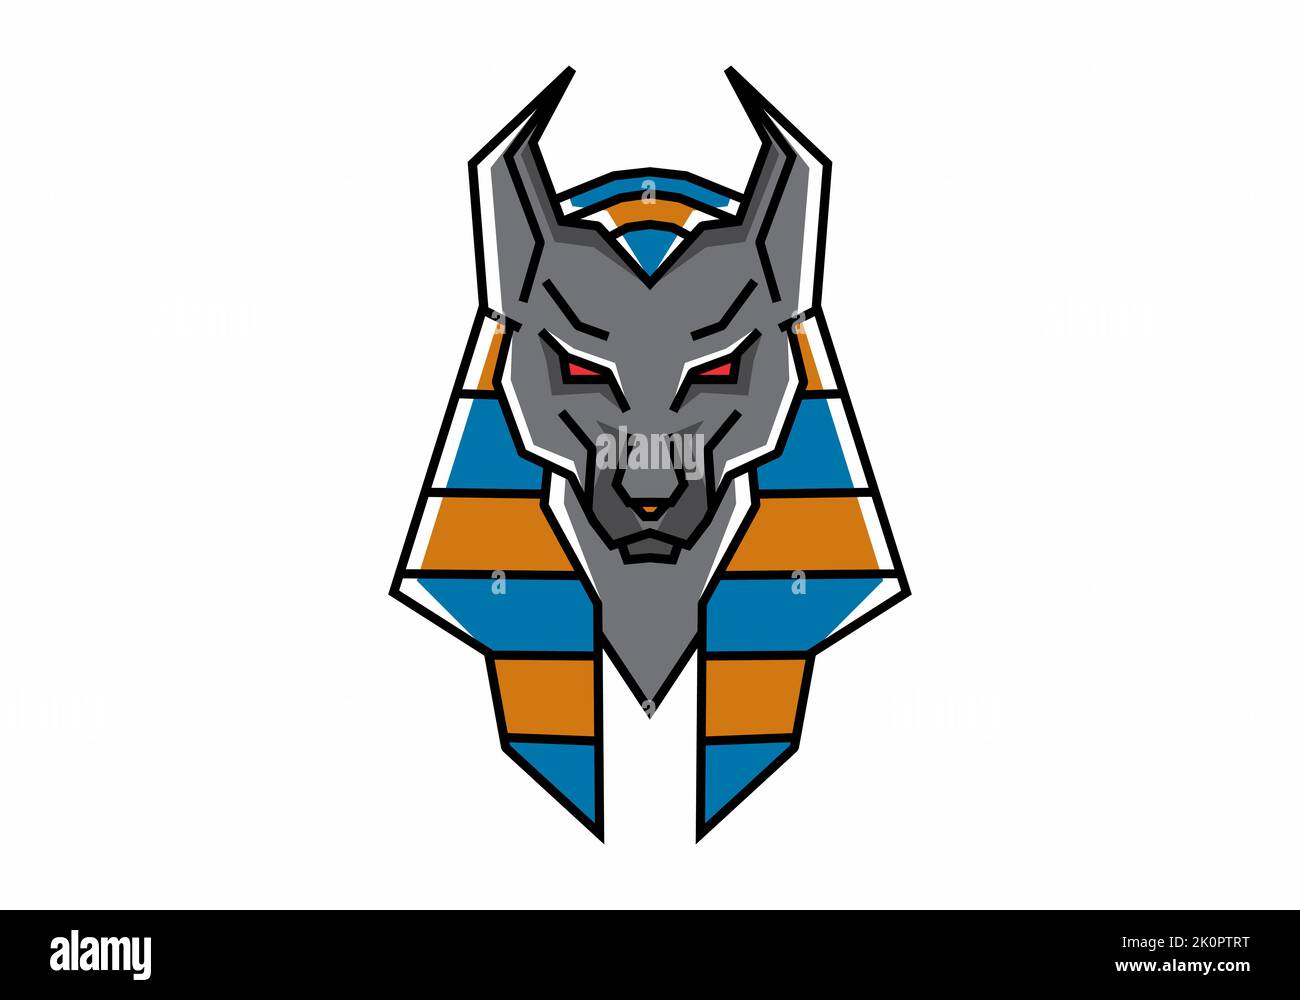 The Anubis head illustration design on white background Stock Vector